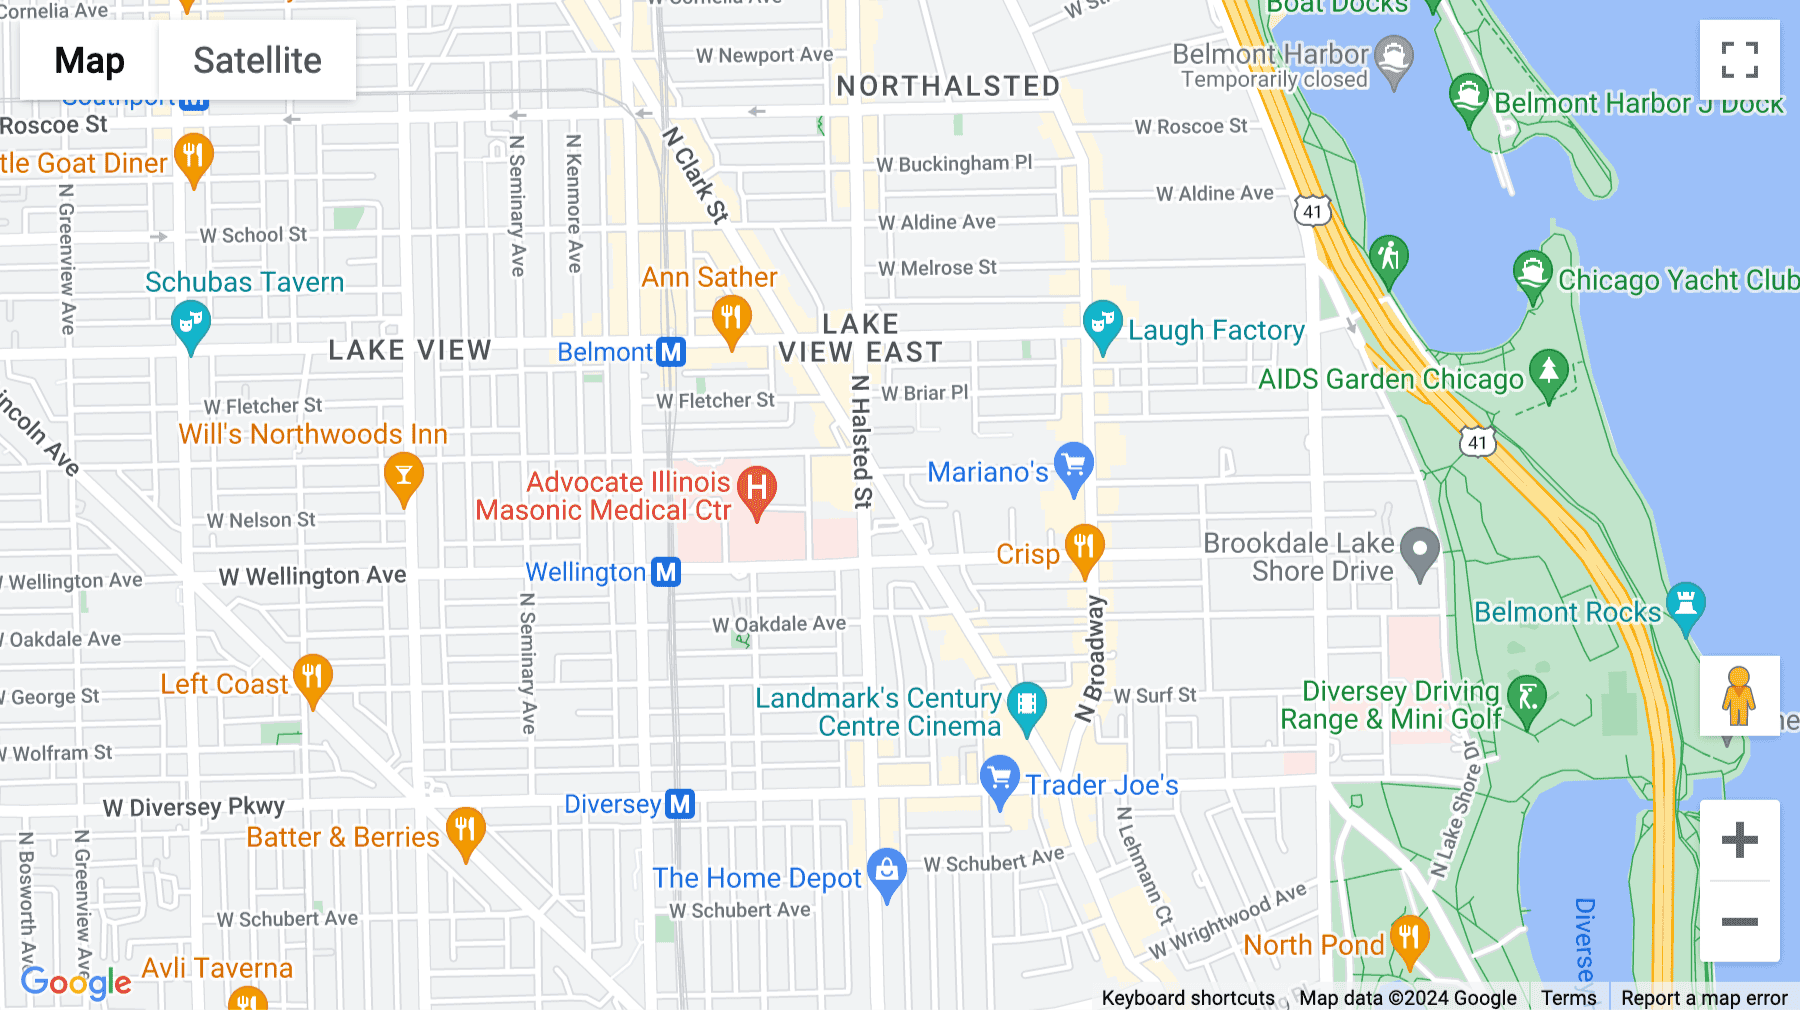 Click for interative map of 3033 N Clark Street, Chicago, IL, Chicago